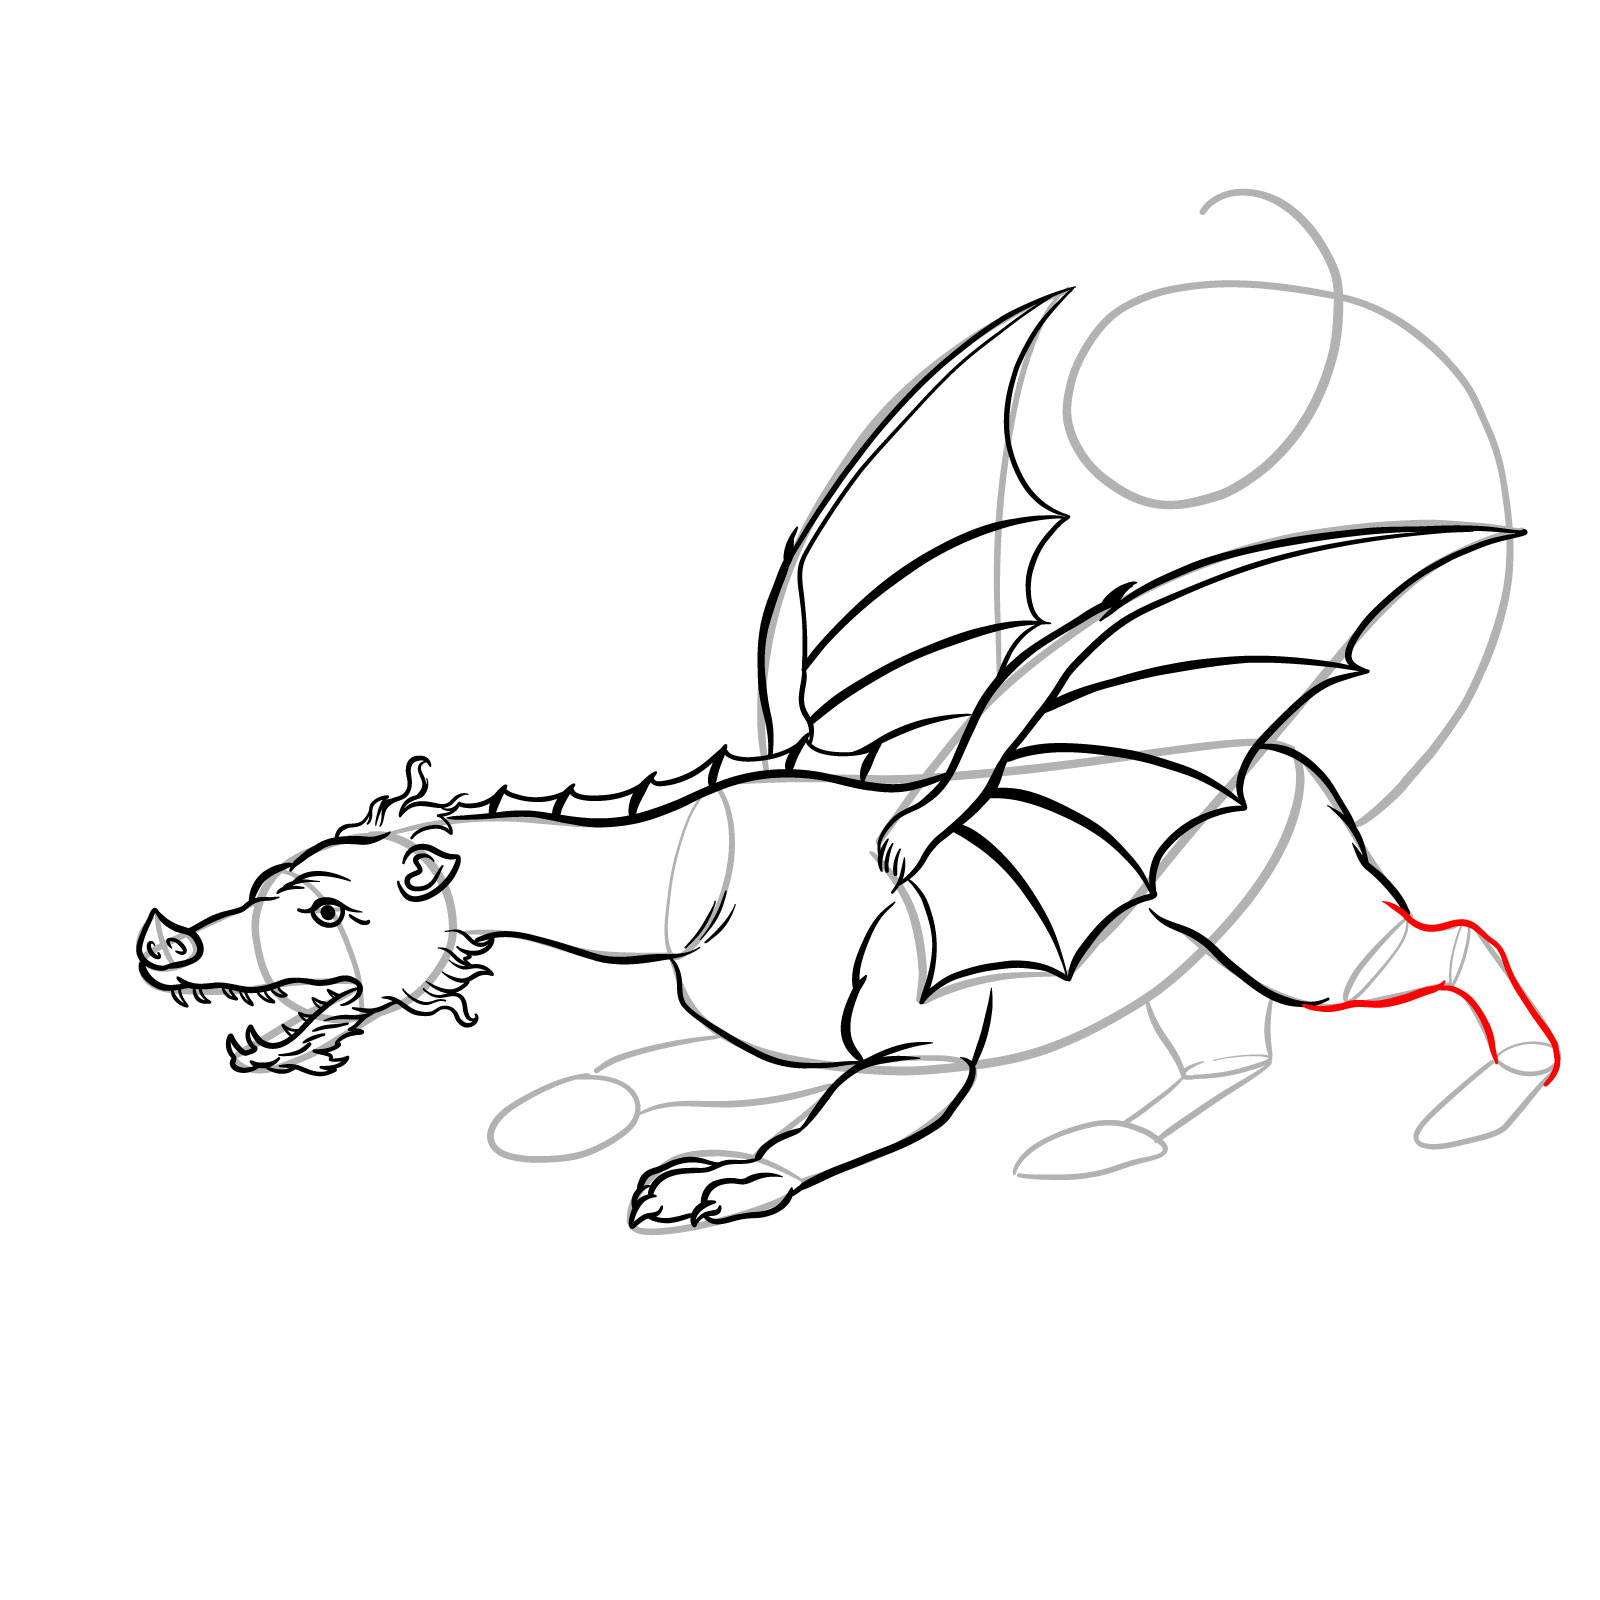 How to draw a classic European dragon - step 30